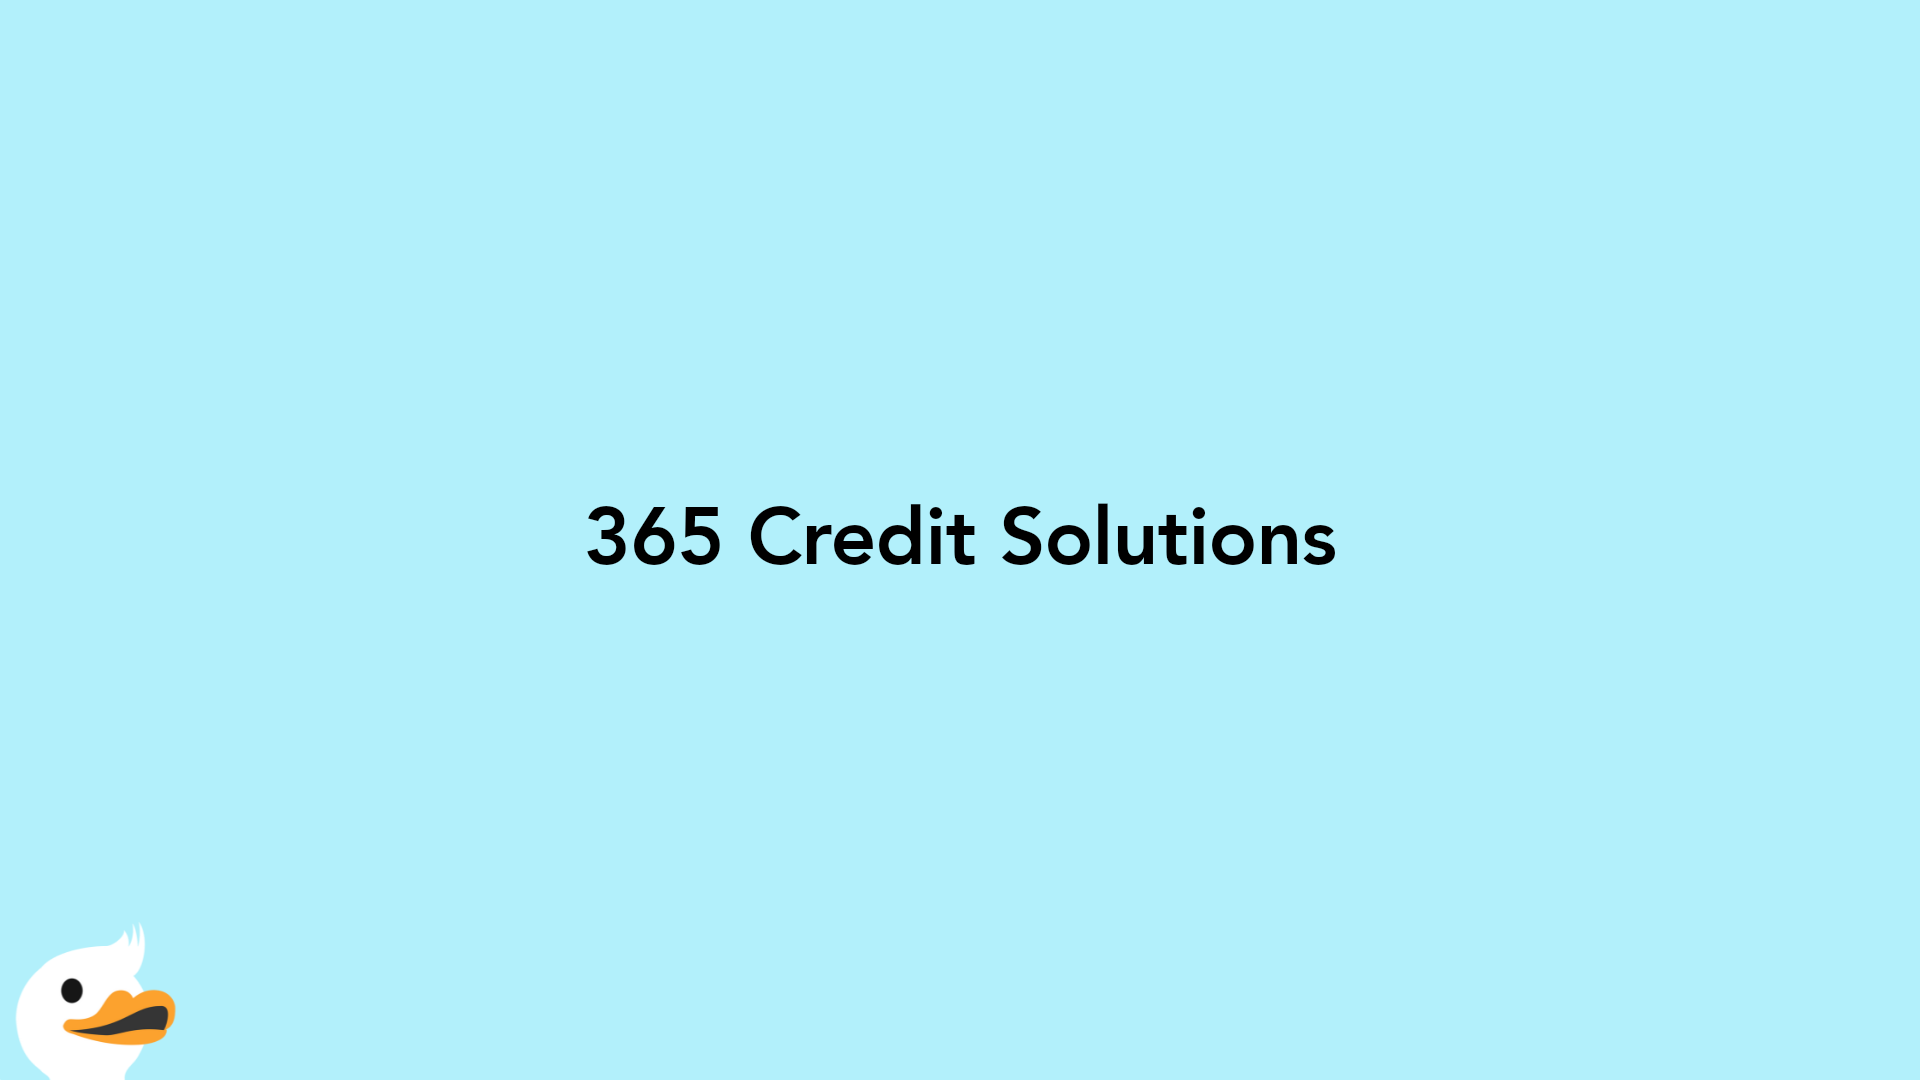 365 Credit Solutions